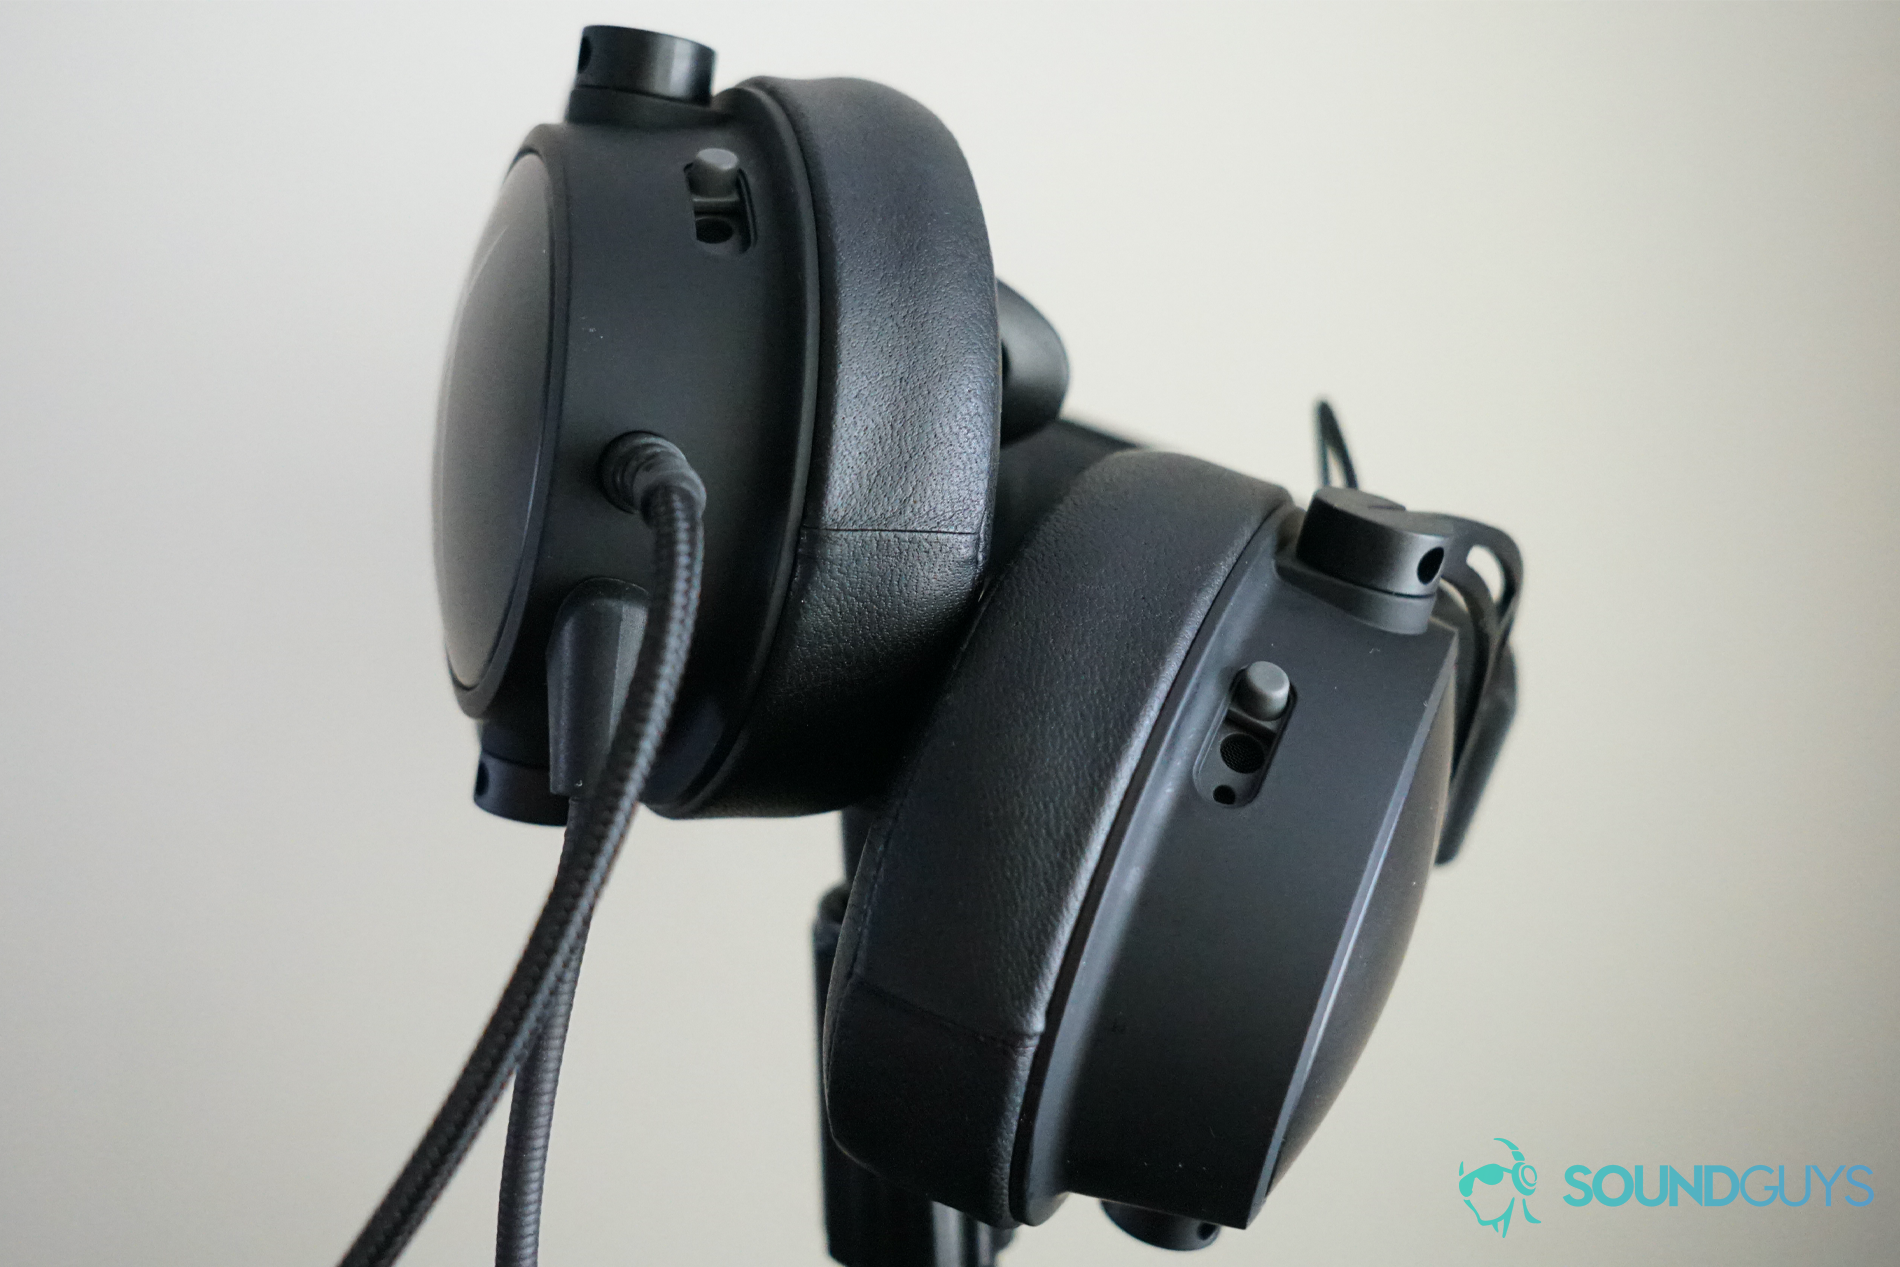 The HyperX Cloud Alpha S vents are shown, both set open all the way.